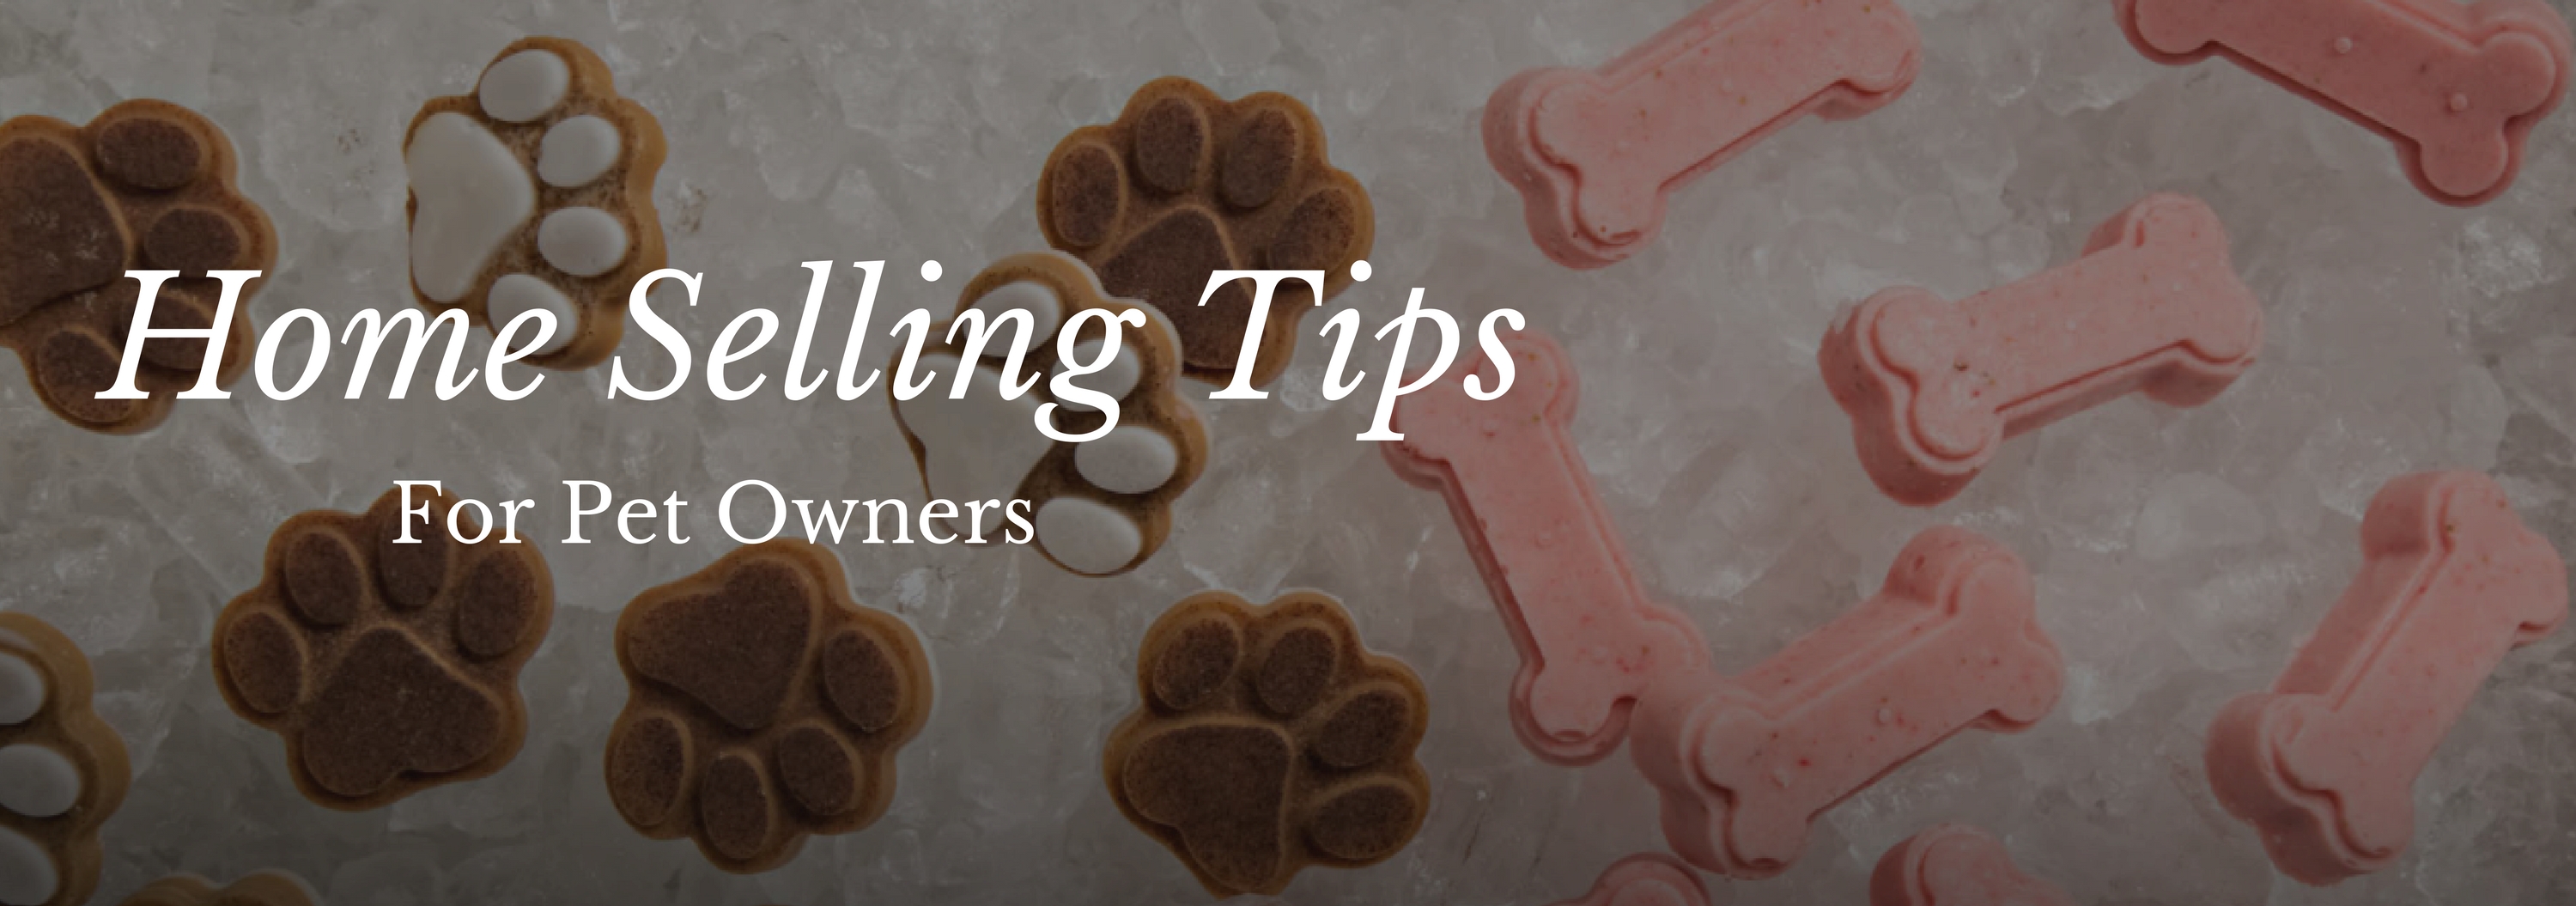 Tips for Pet Owners!